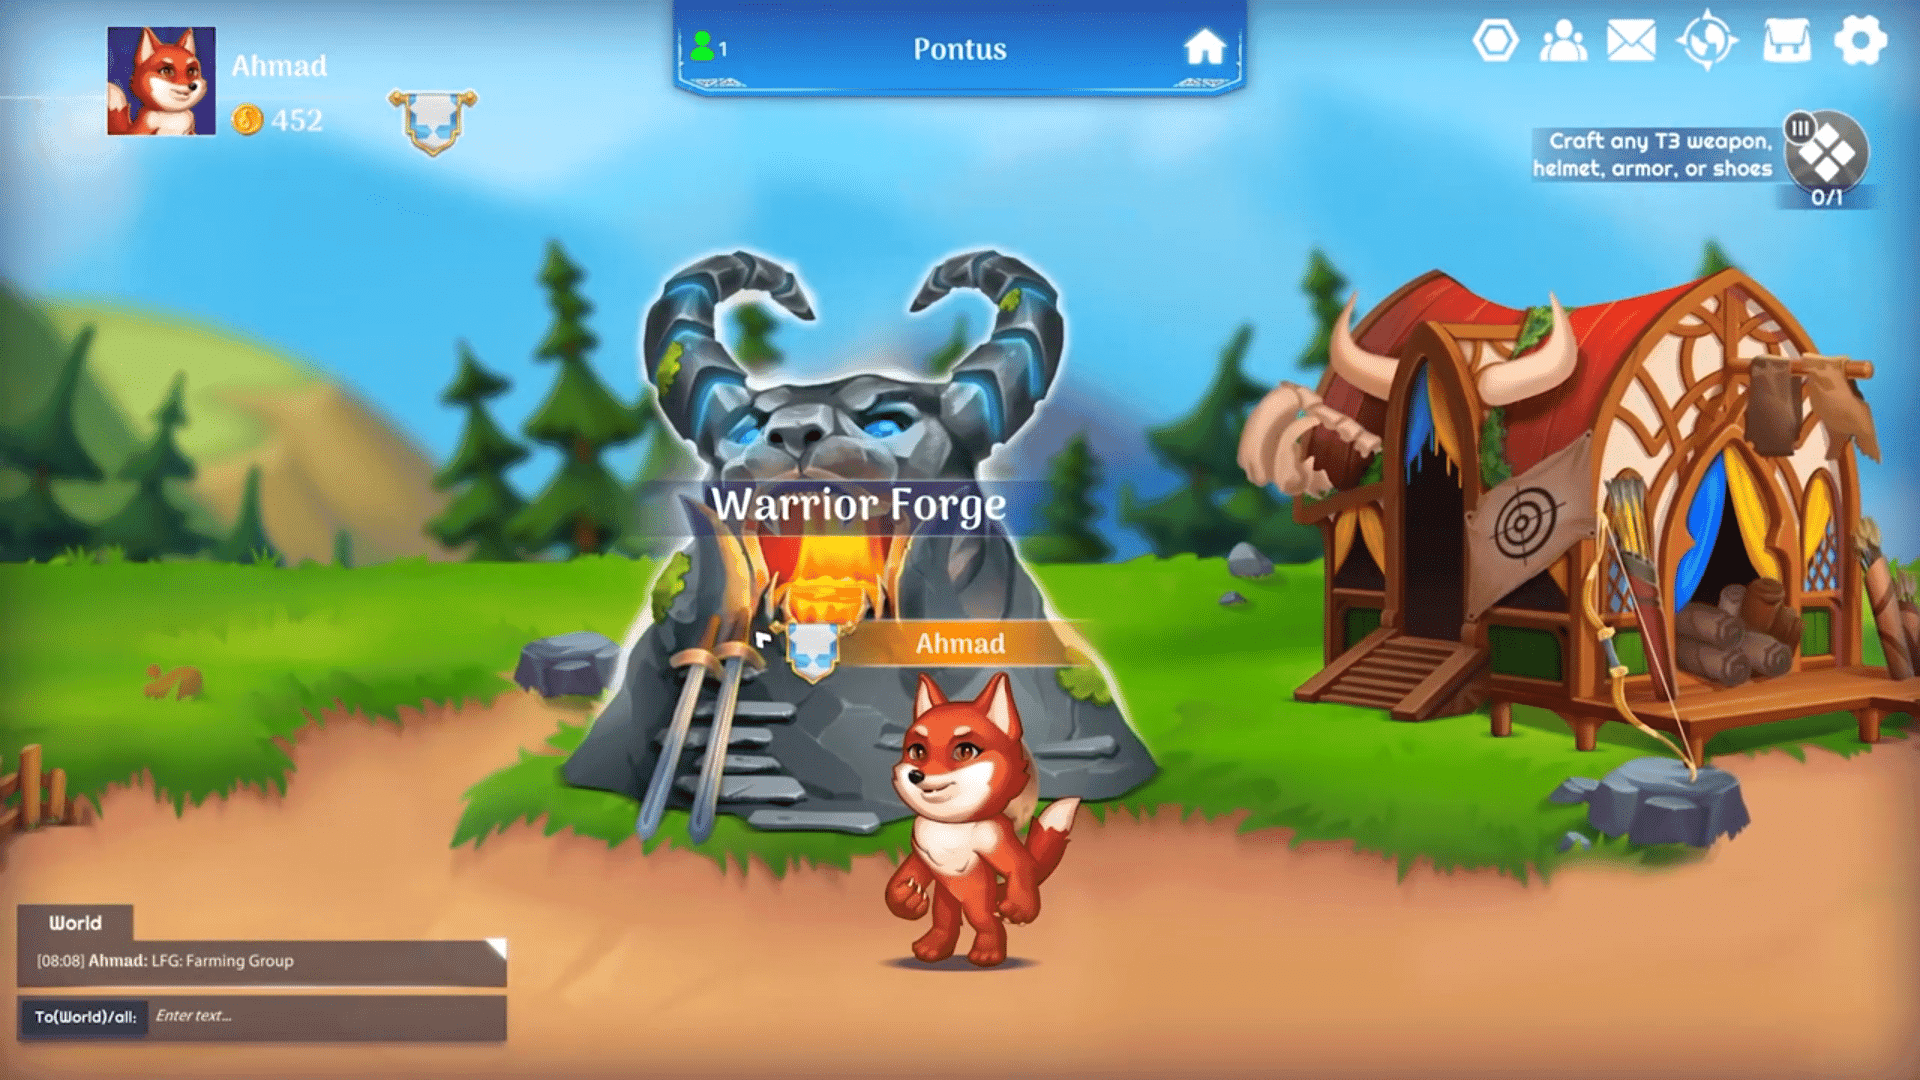 Nifty Craft, a 2D Sandbox MMORPG, boasts a player-driven economy, gathering resources, crafting items and thrilling PvP battles in real-time